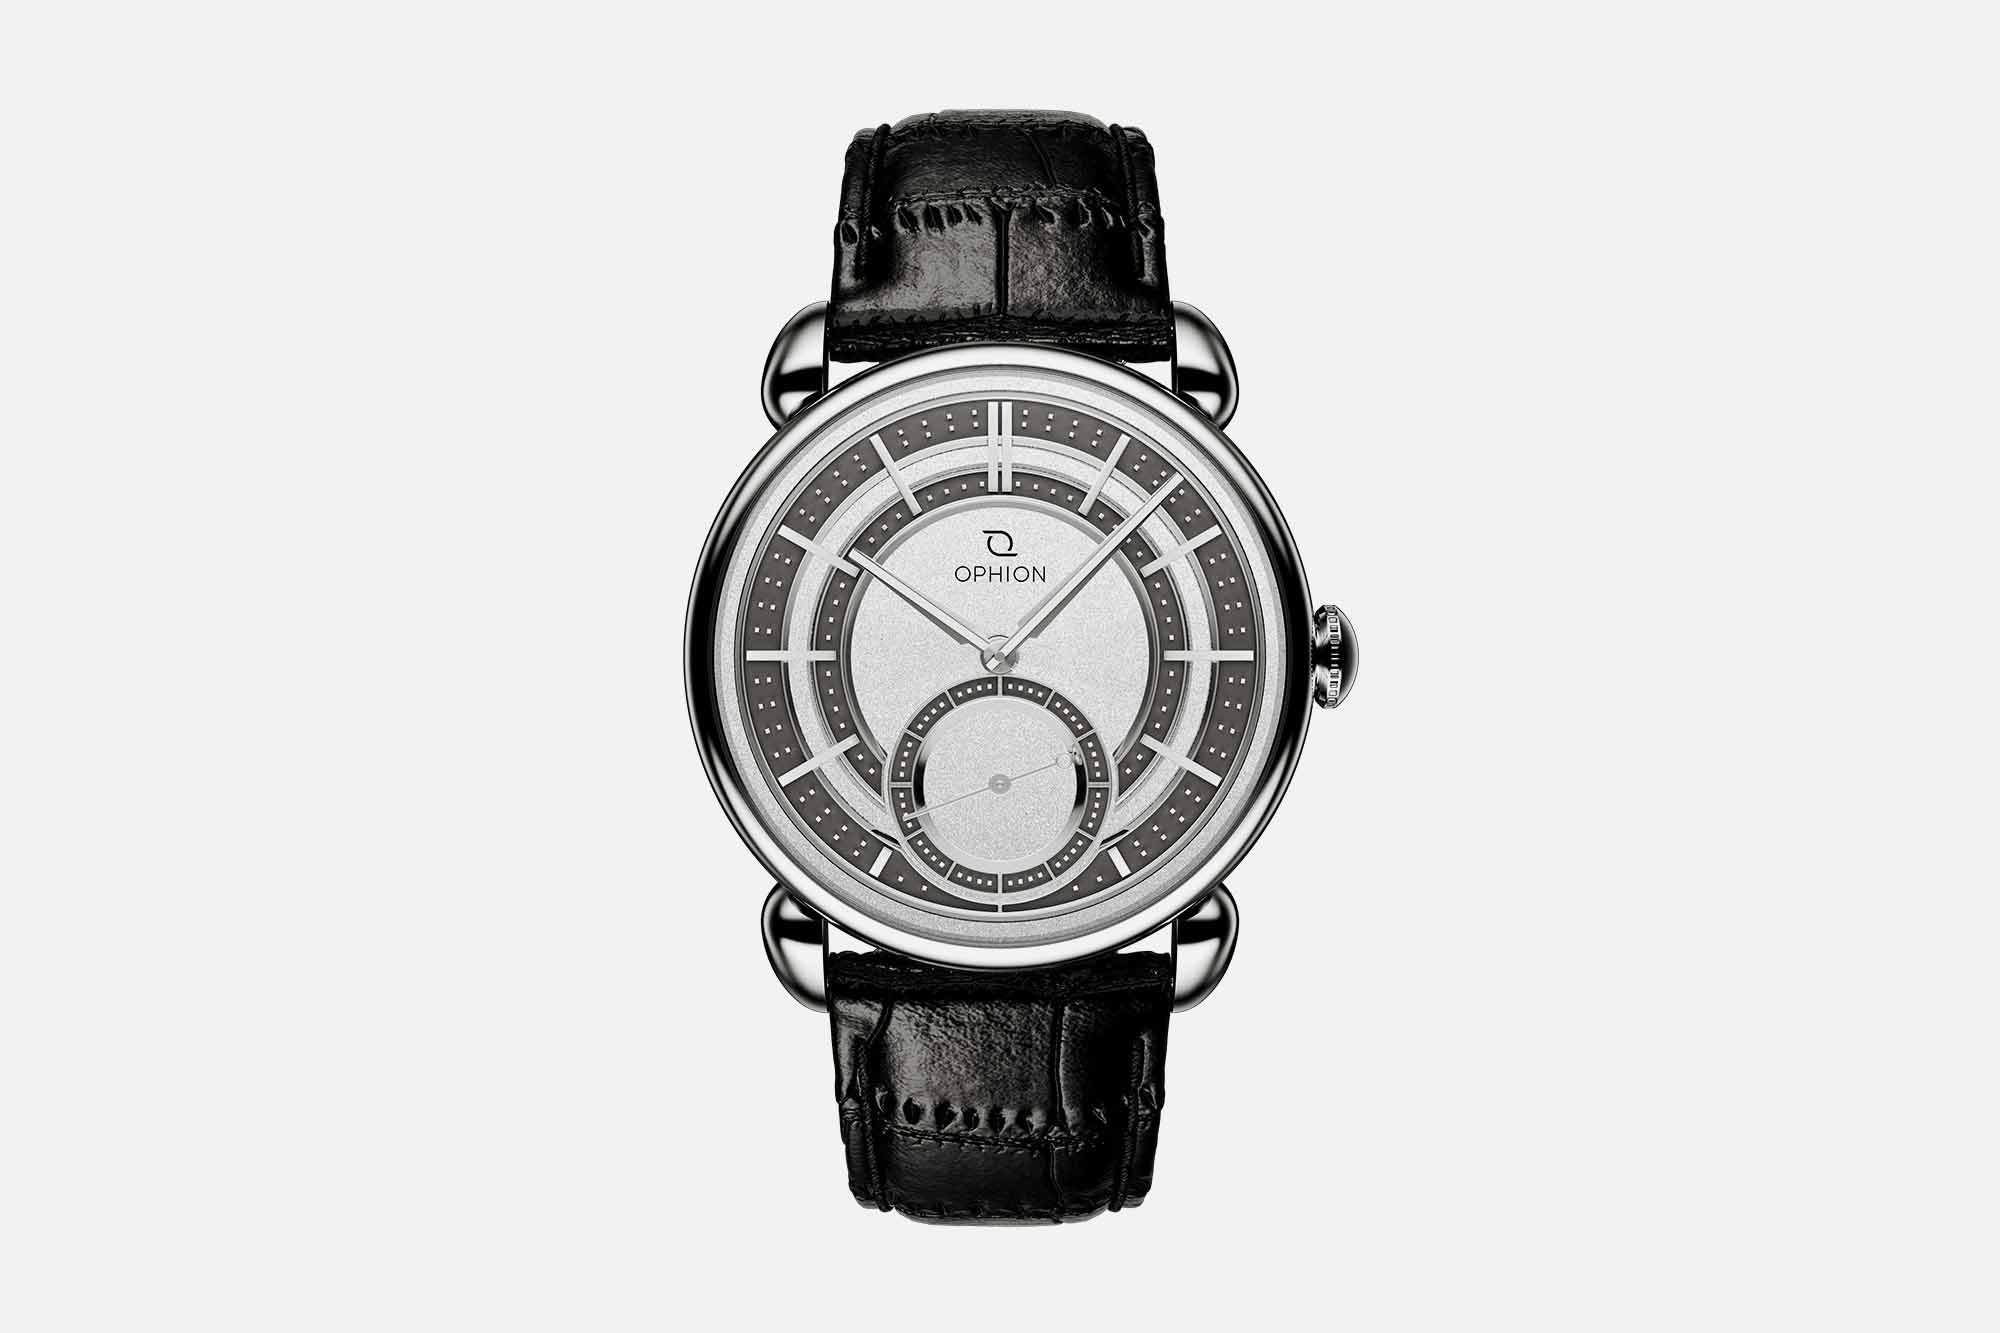 Ophion is Back with the Vesper, Featuring a Design Inspired by Neoclassical Architecture